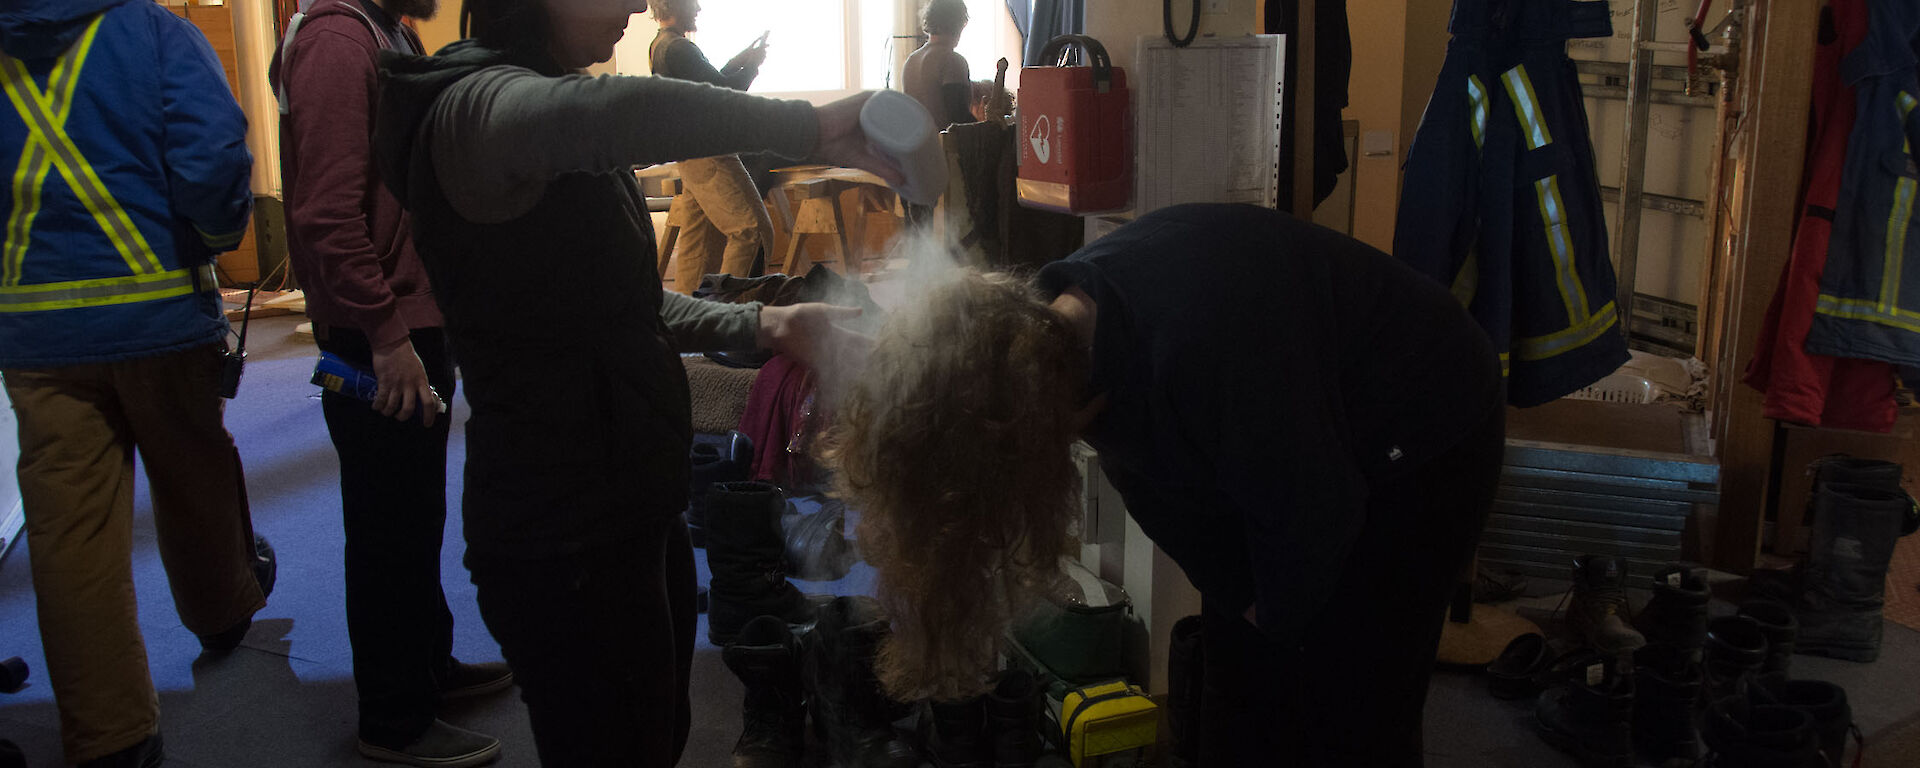 Woman putting talcom powder through hair or person bent over